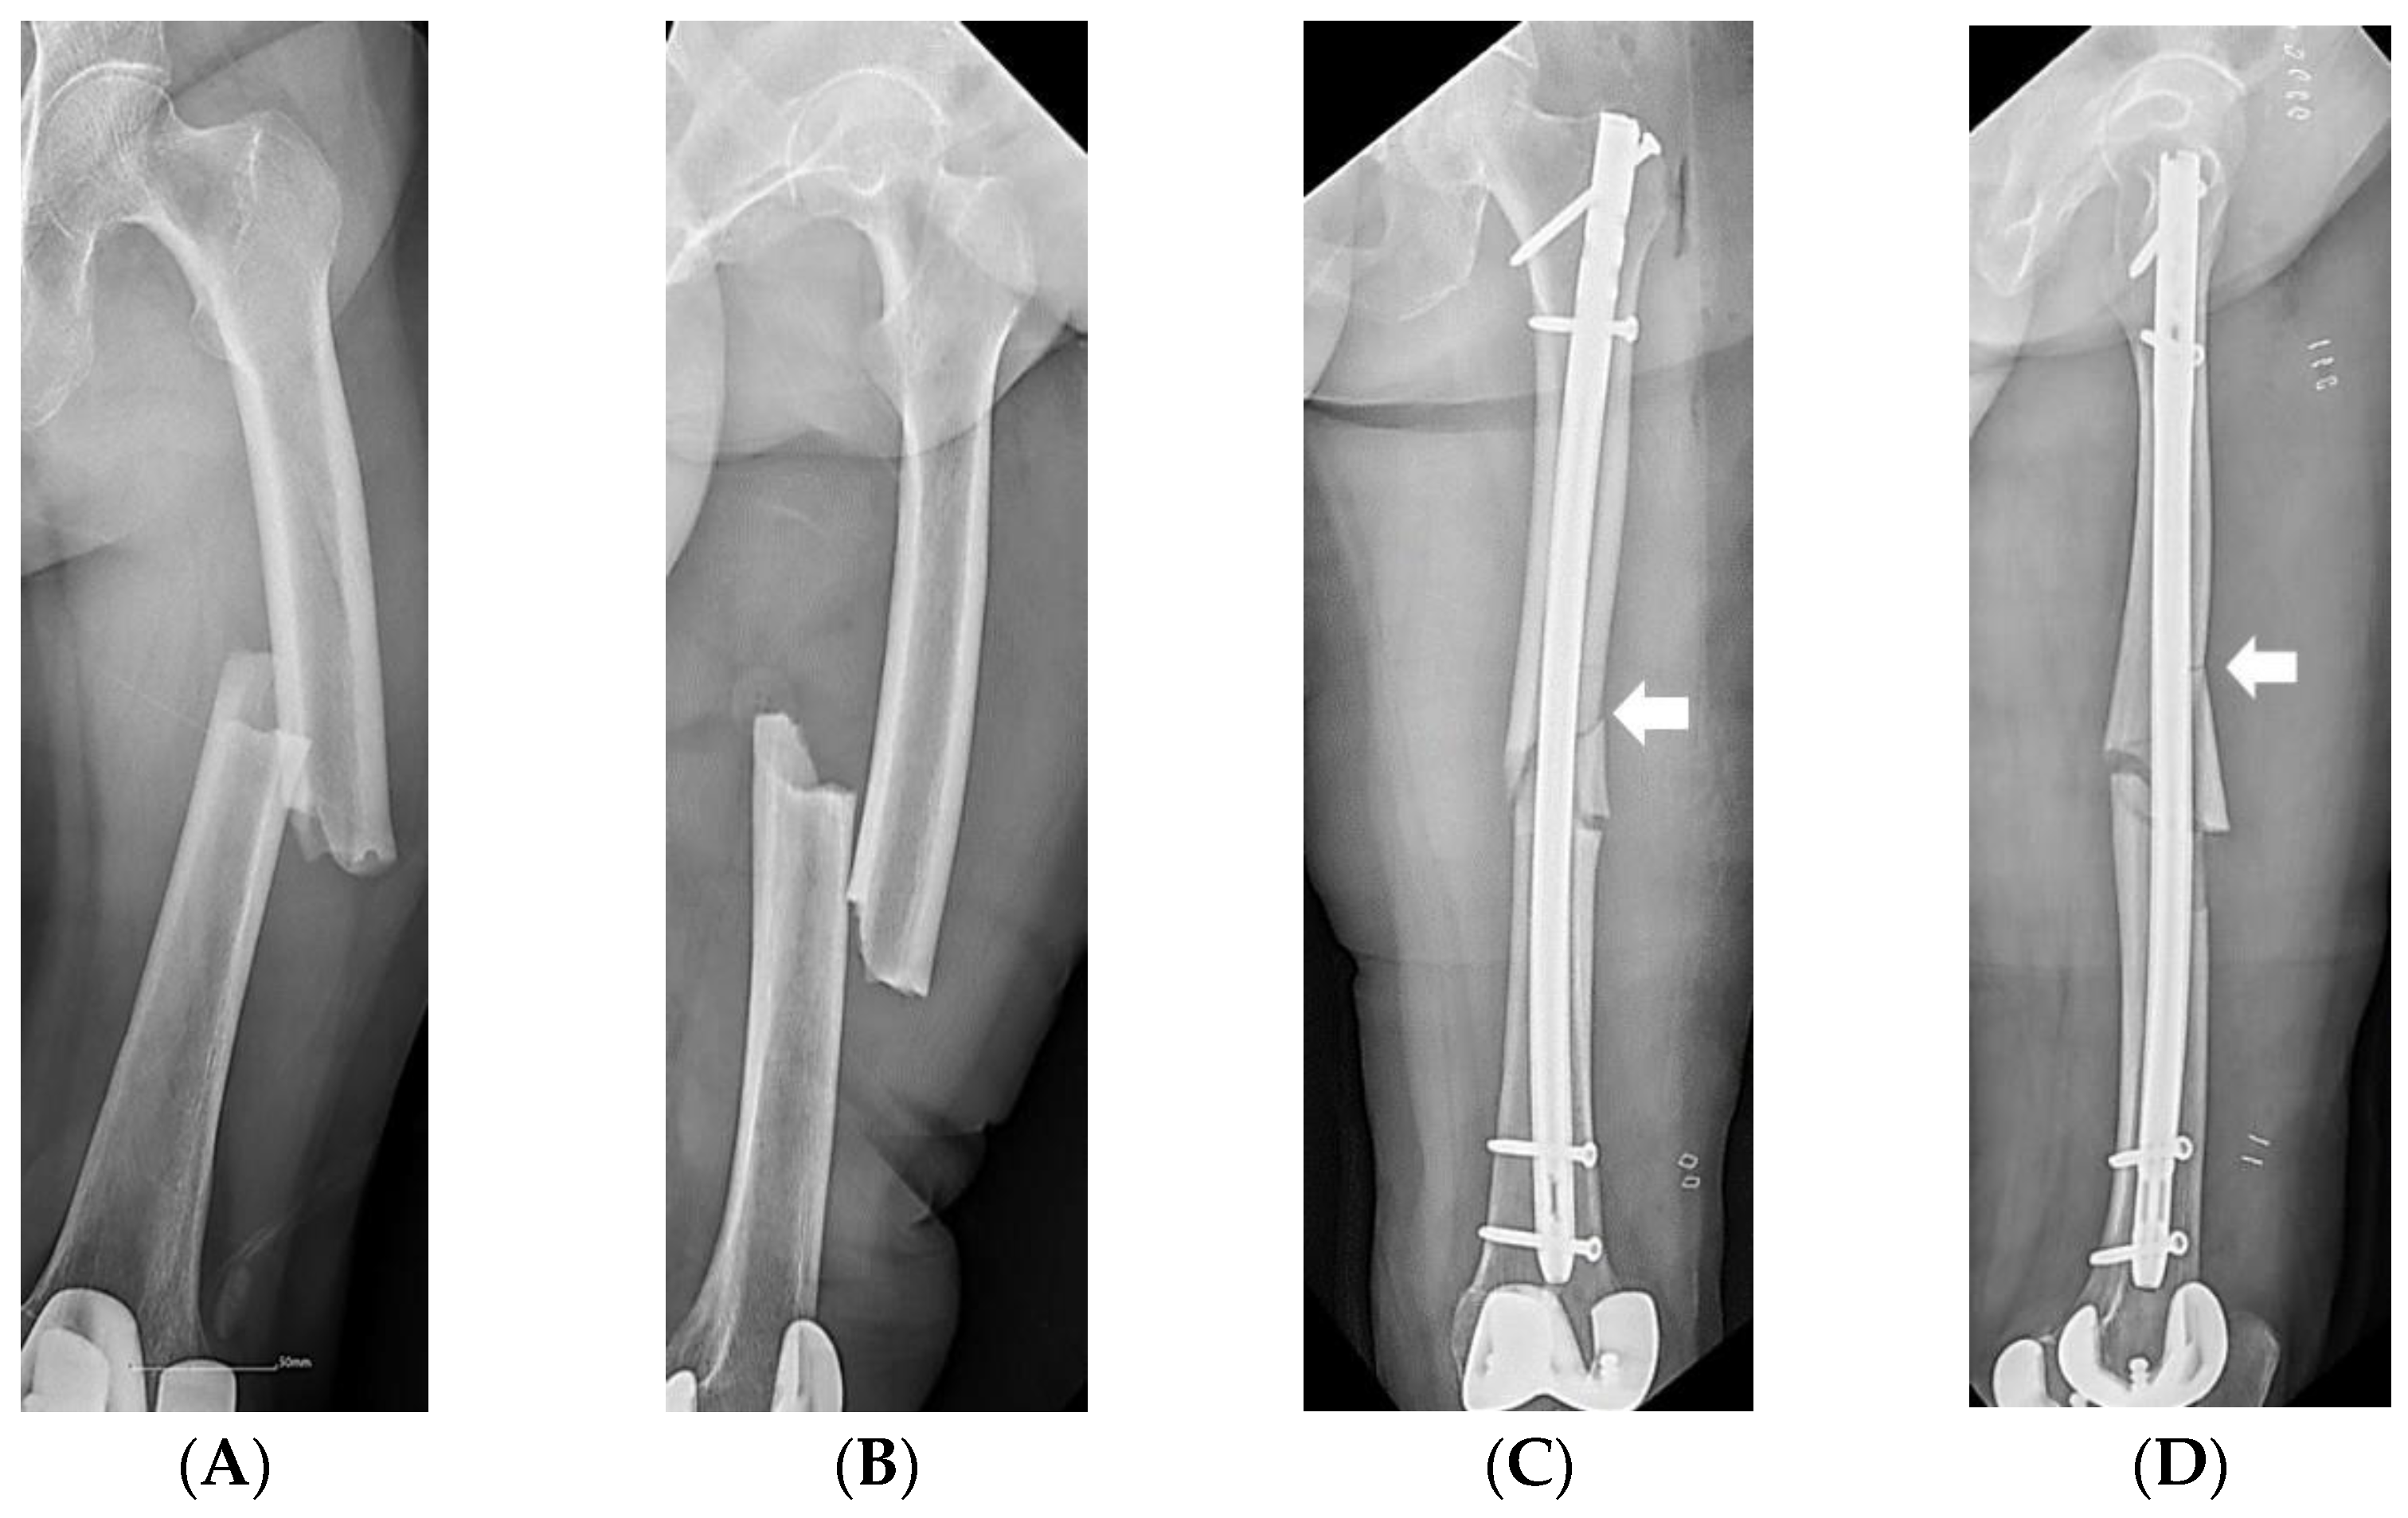 3. Clinical Outcomes of Brooker-Wills Interlocking Intramedullary Nail Design in Femoral Fractures - wide 1